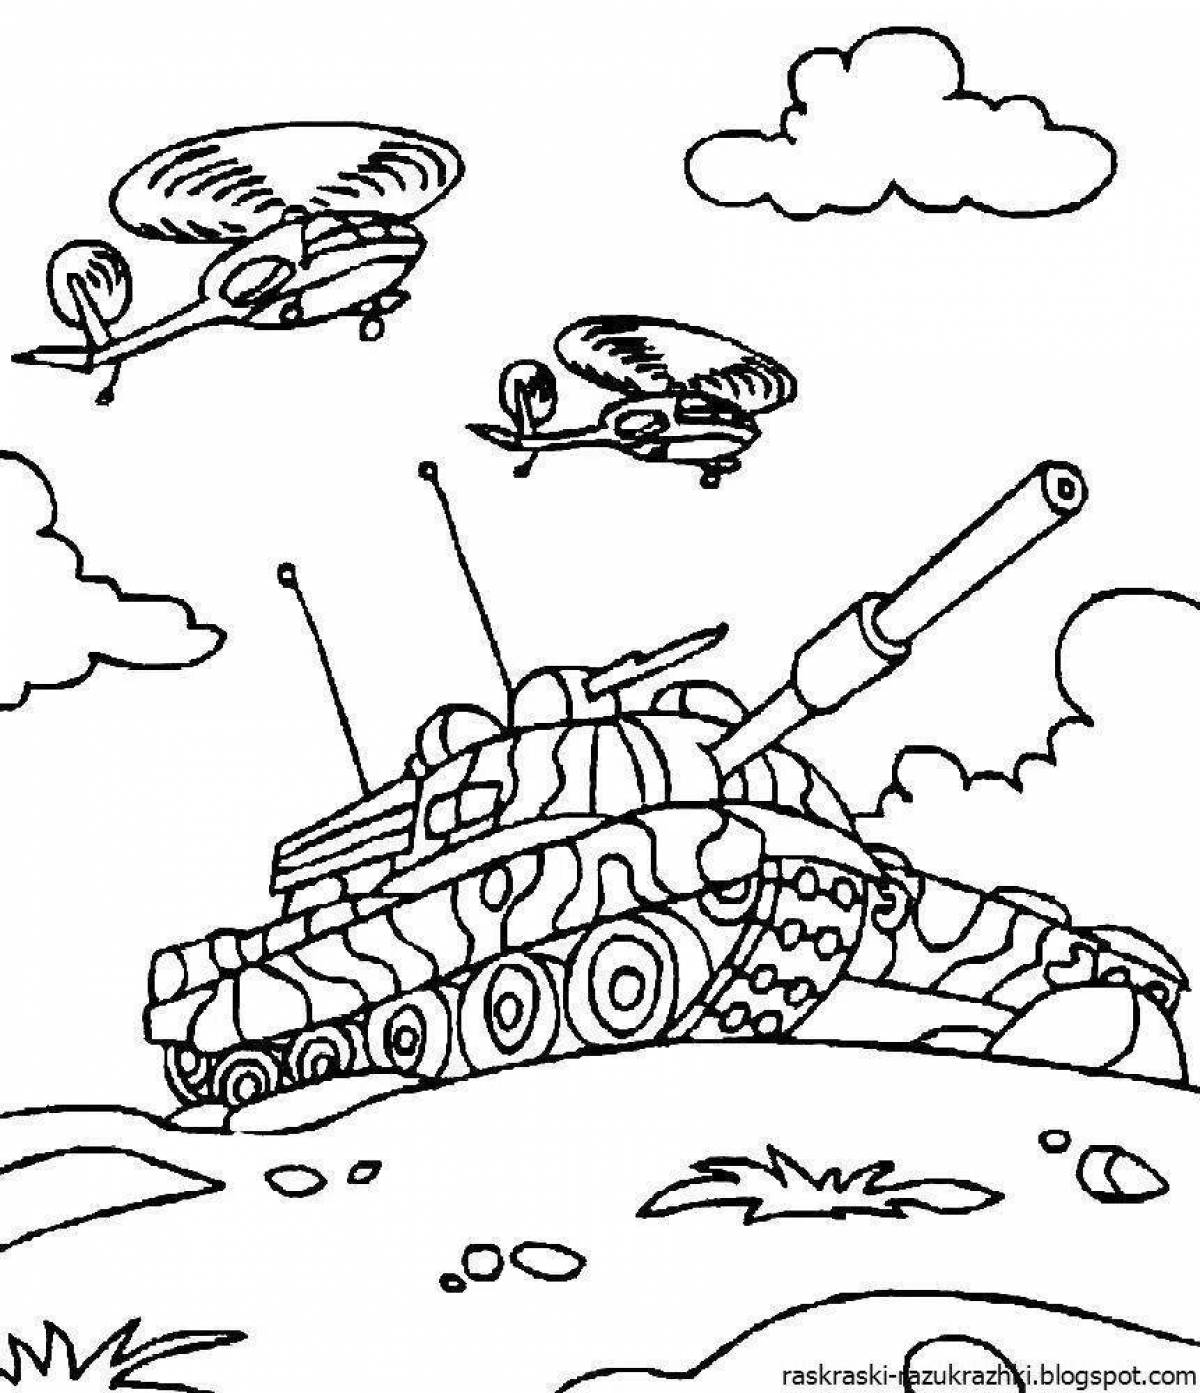 Coloured military coloring book for children